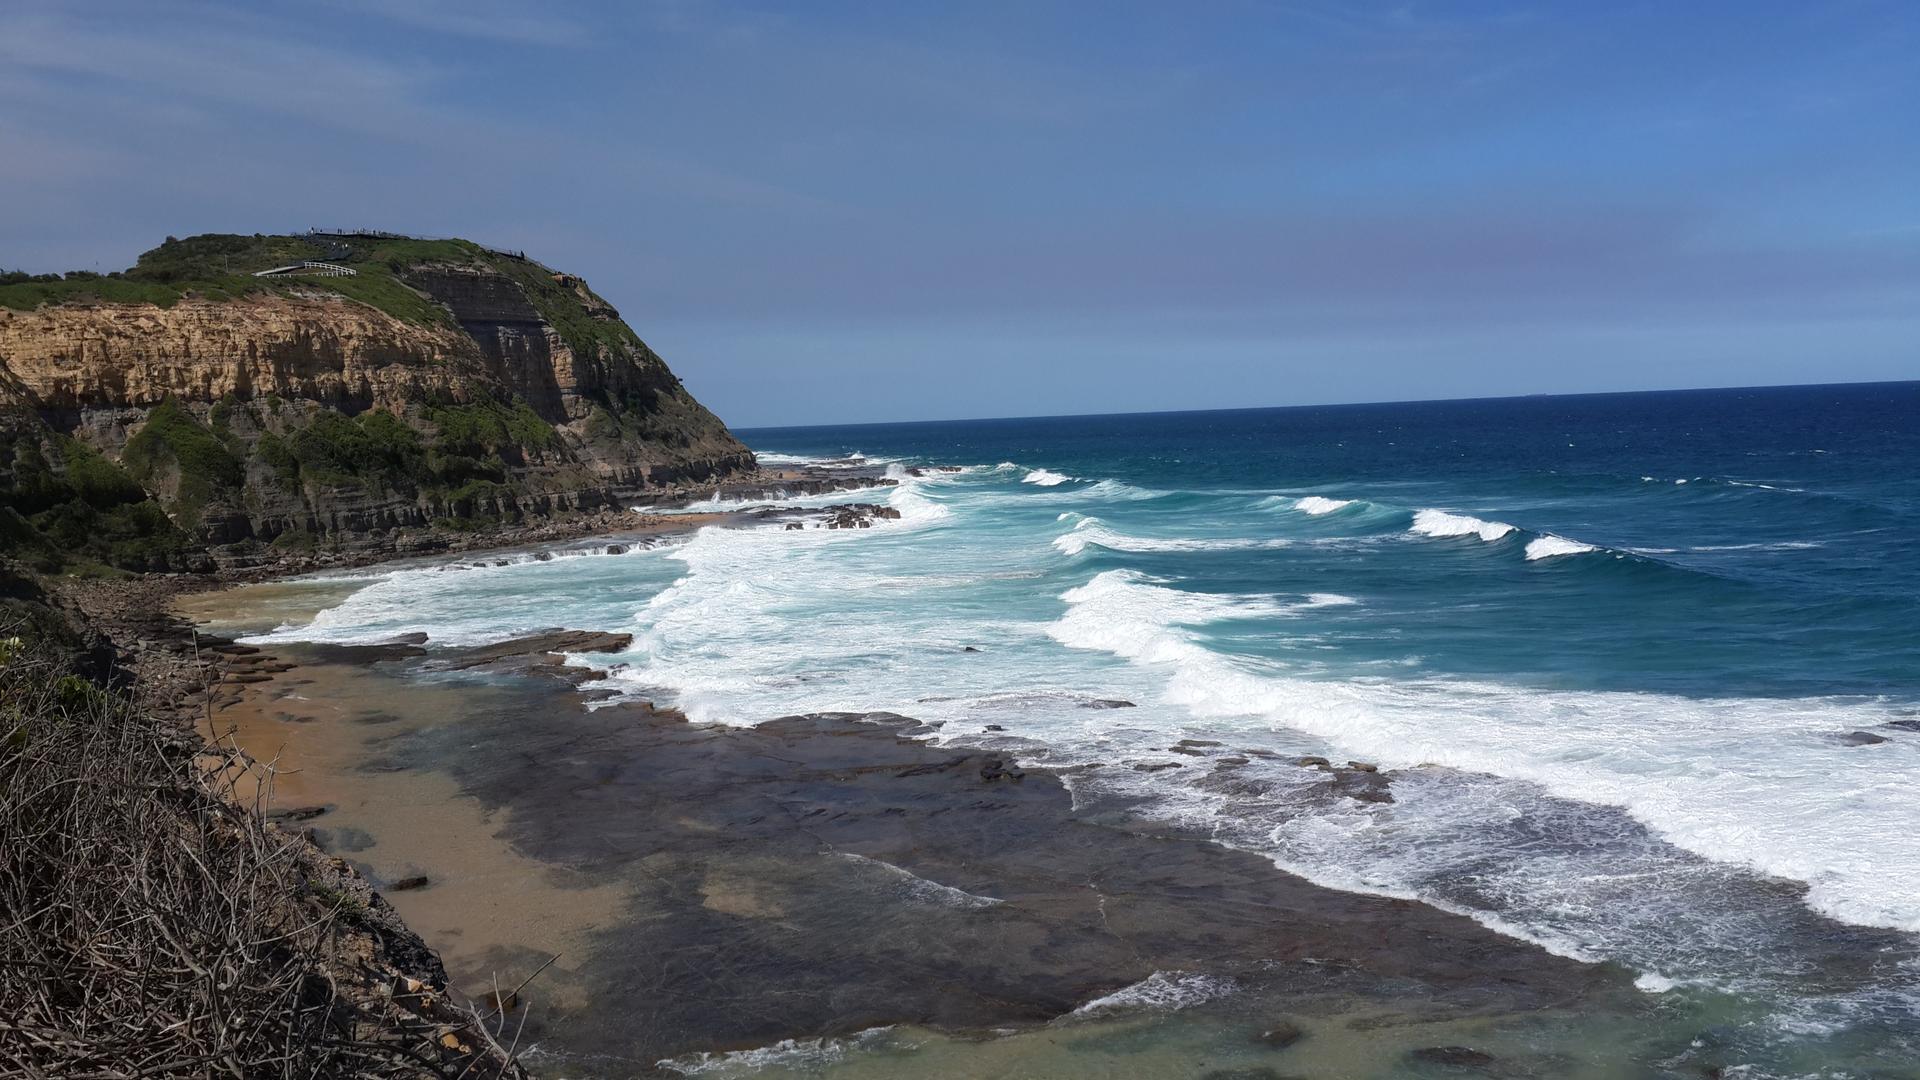 Day 42: Merewether beach in Newcastle. Water was still a bit cold but it was still possible to swim.